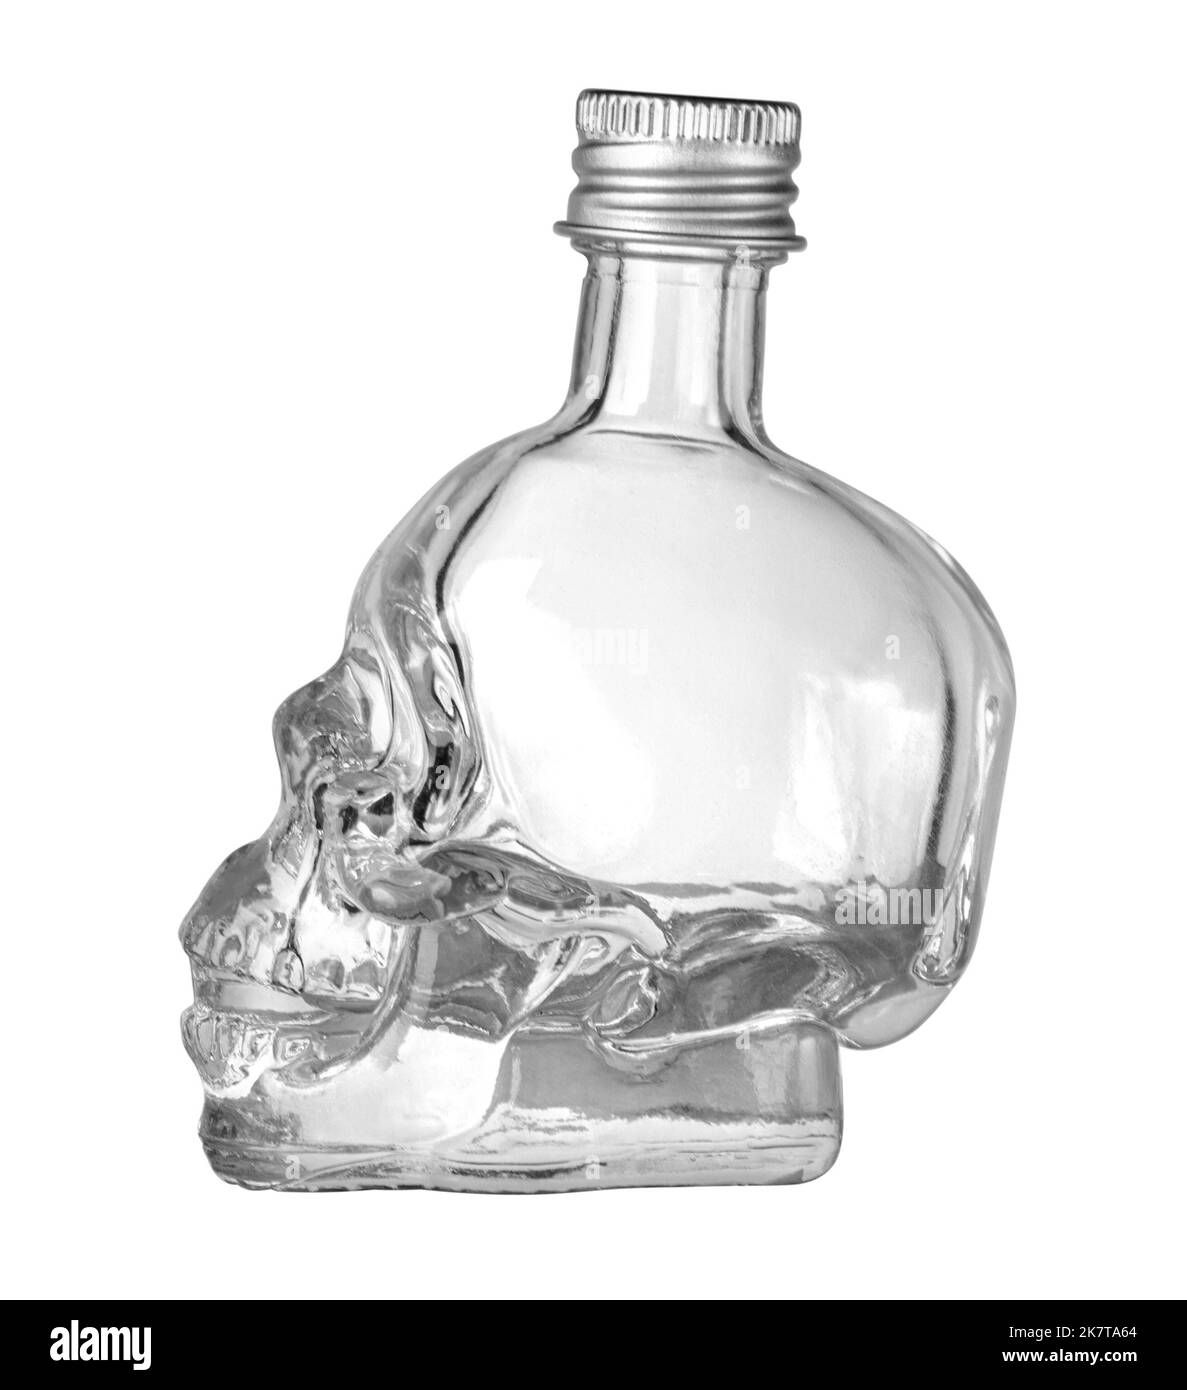 glass bottle in the shape of a skull isolated on white background with clipping path Stock Photo